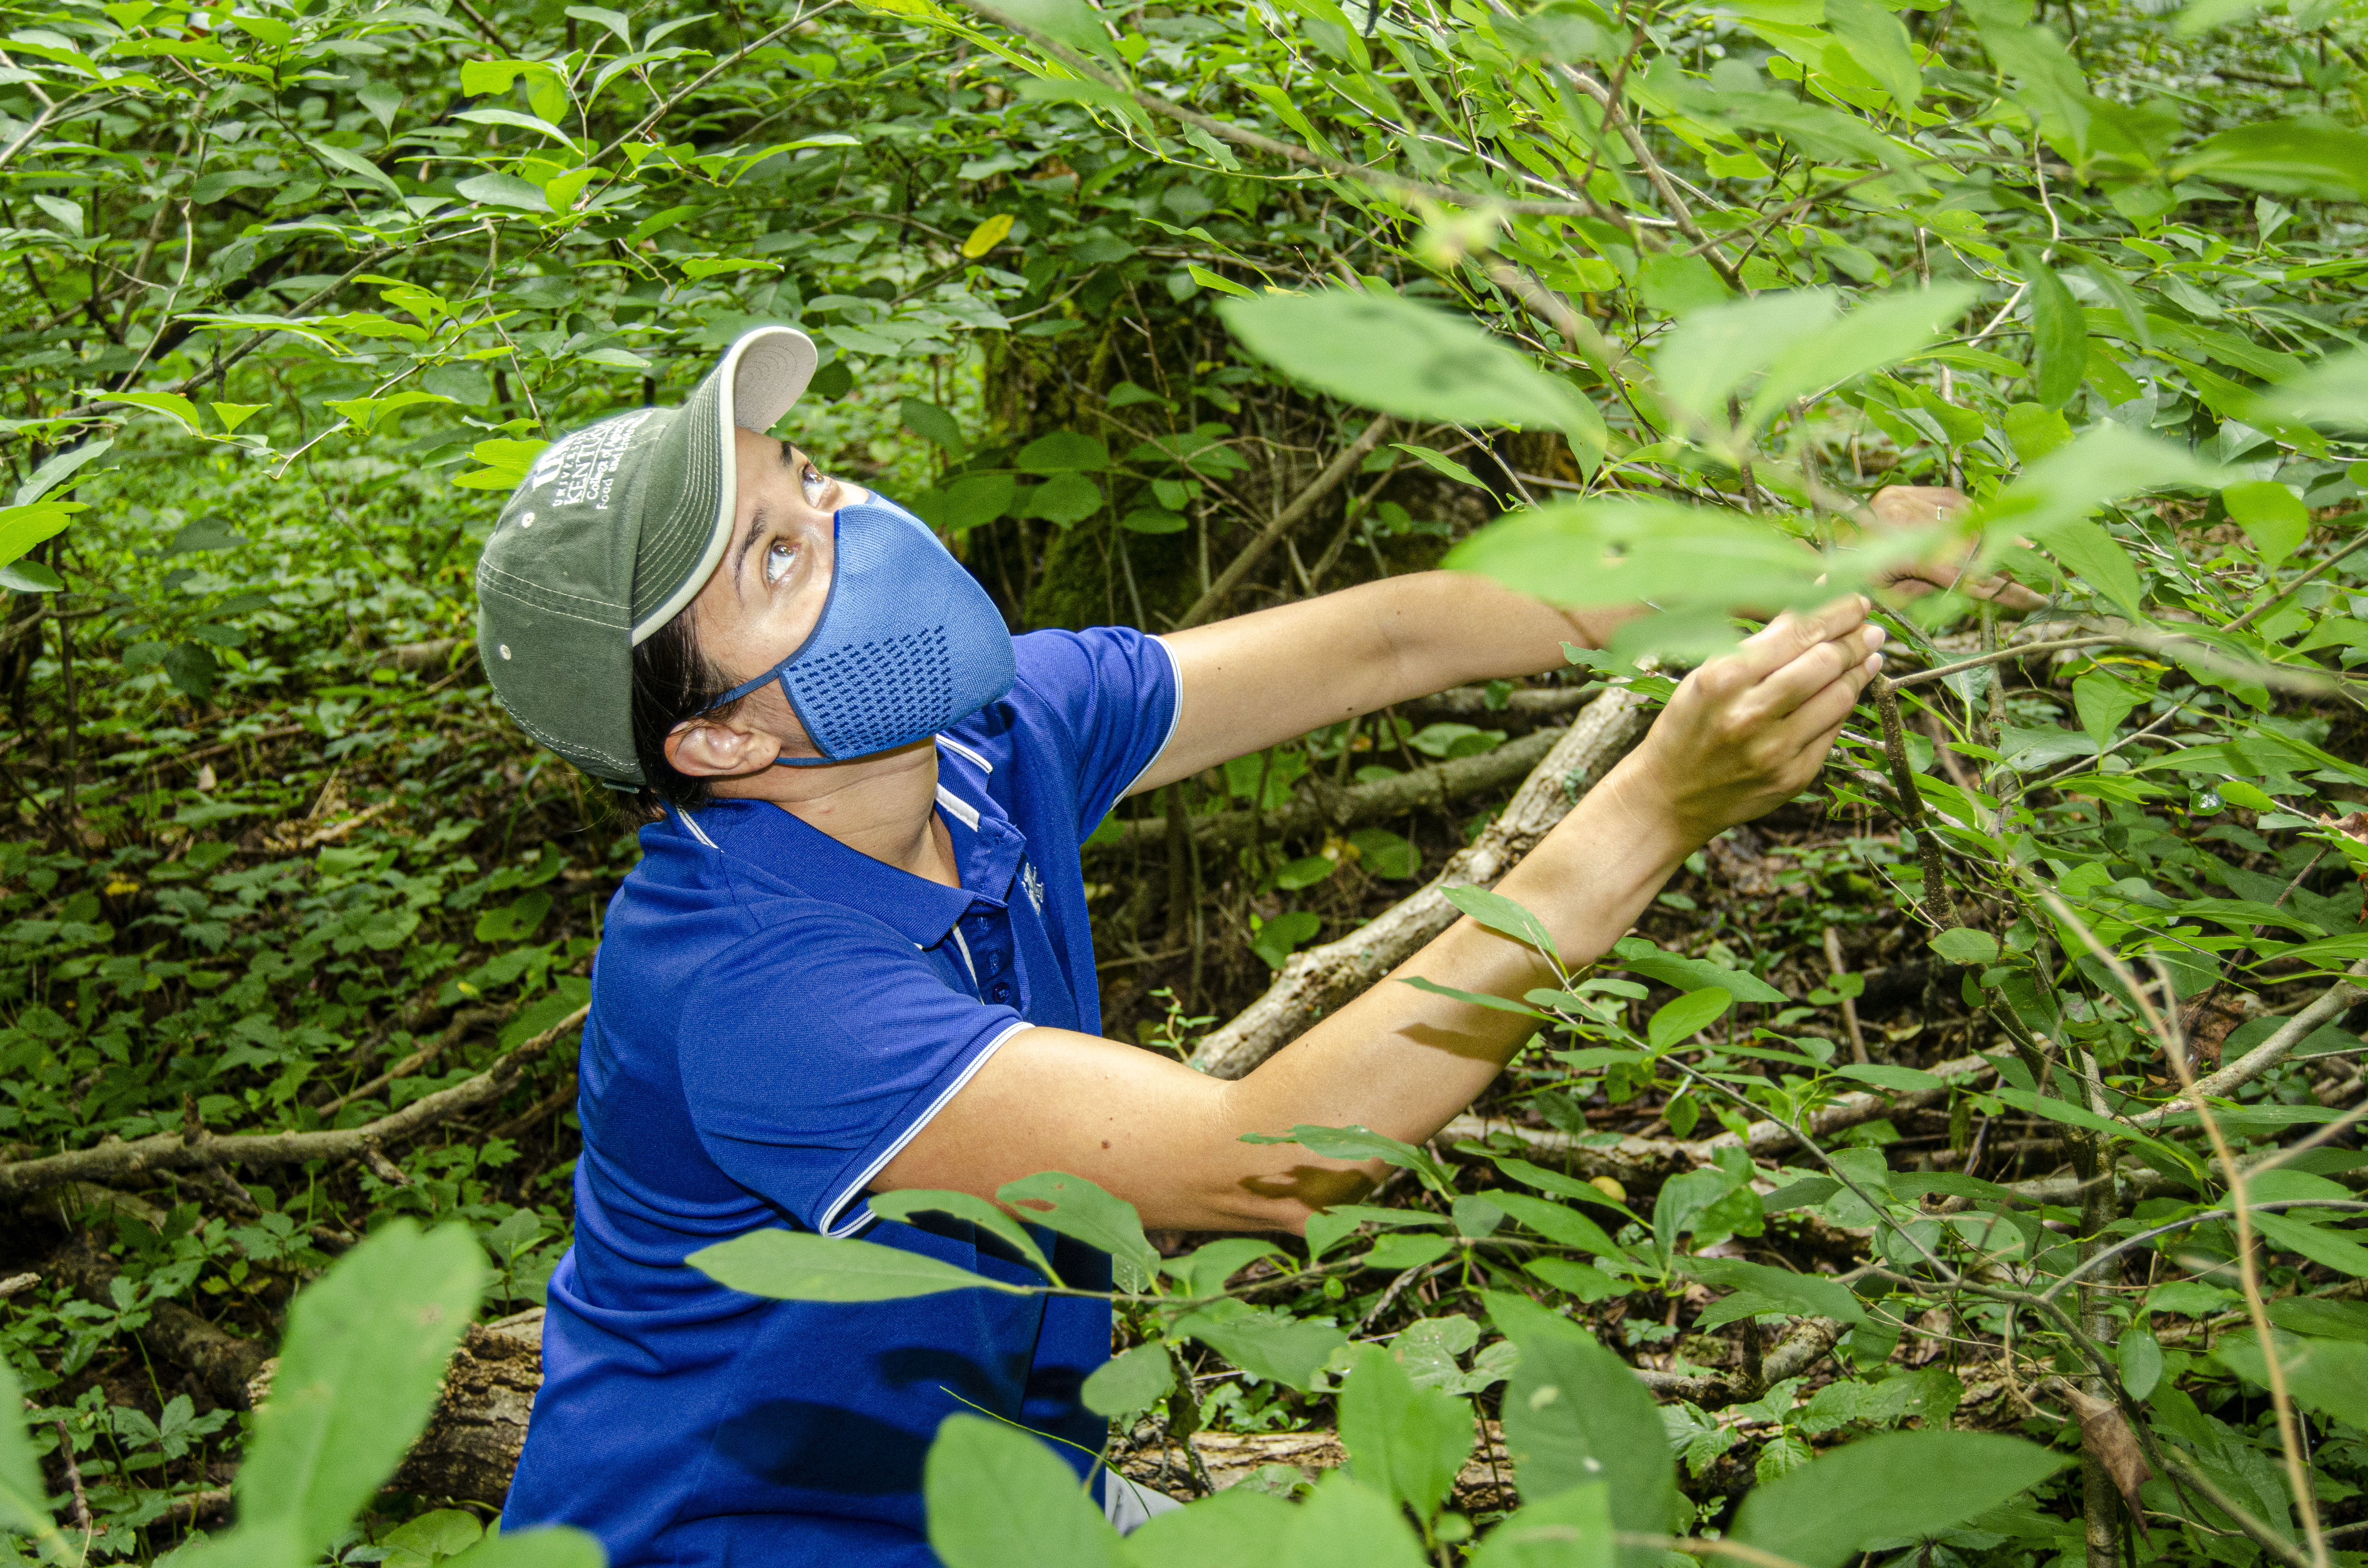 Ellen Crocker searches for spicebush caterpillars as part of a study on the impact of laurel wilt disease on biodiversity and the ecosystem. Photo by Carol Lea Spence